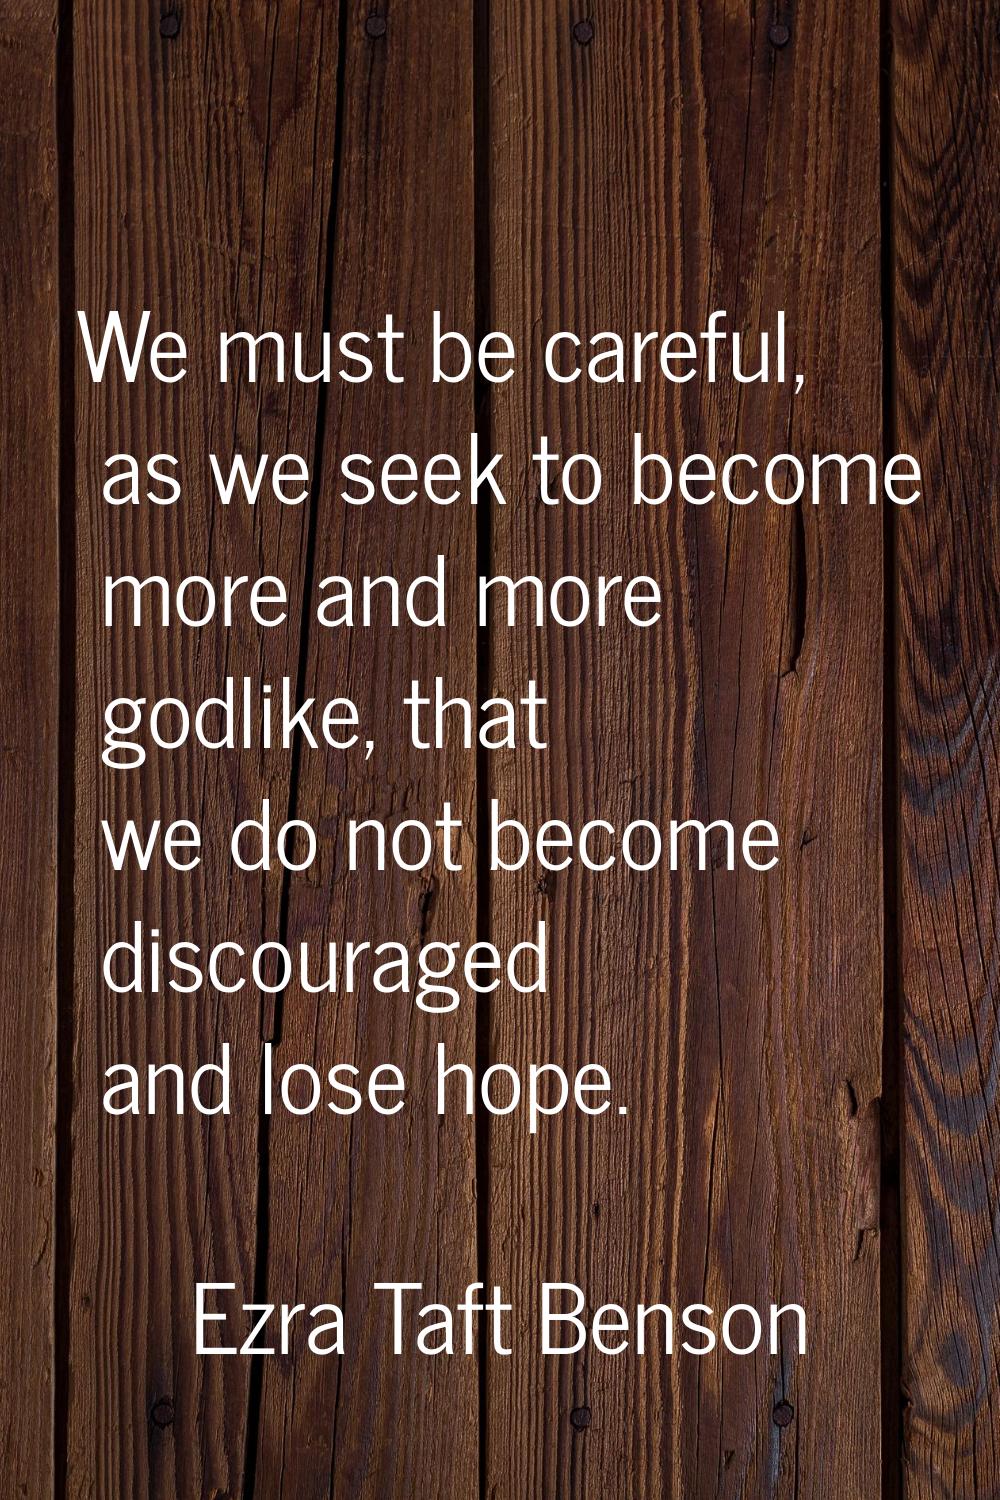 We must be careful, as we seek to become more and more godlike, that we do not become discouraged a